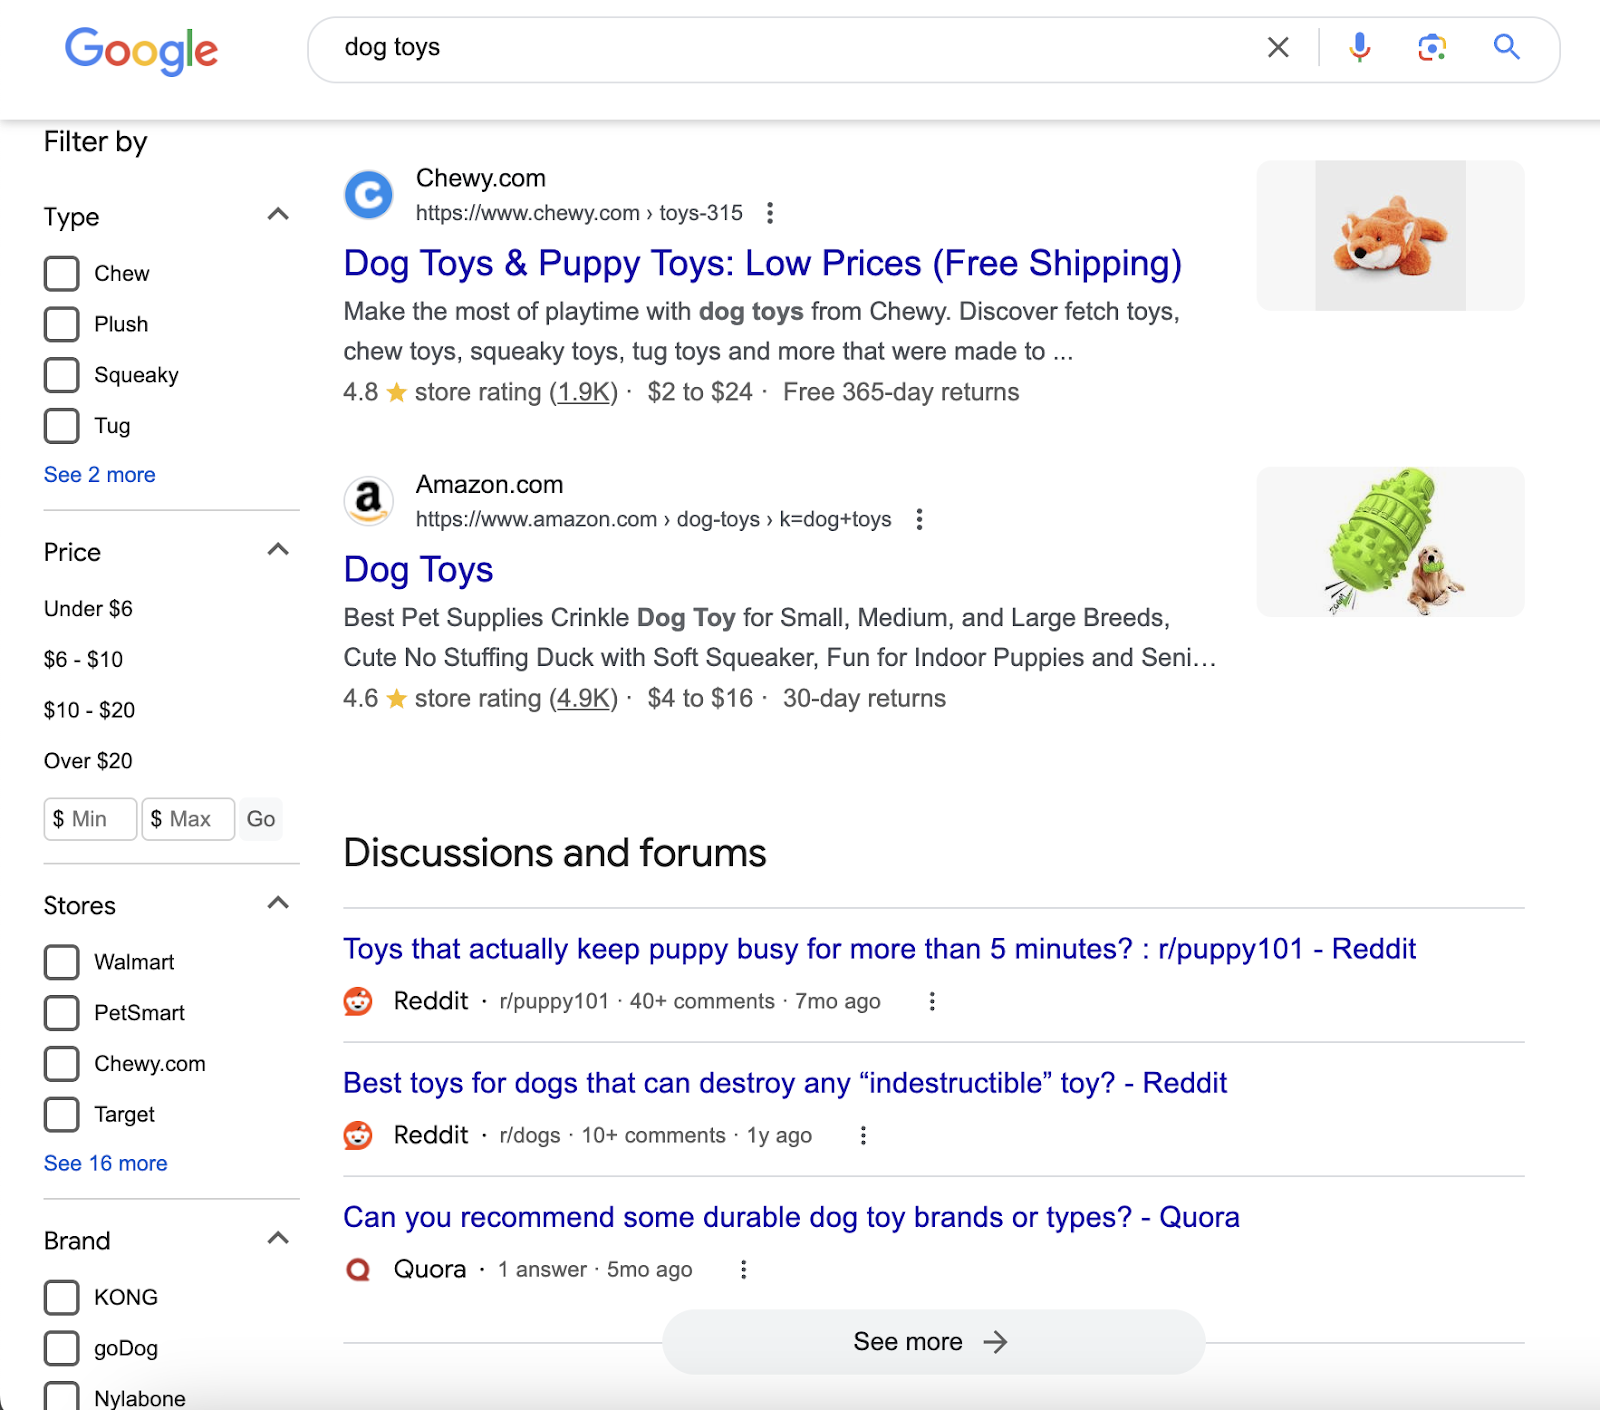 Google search results for “dog toys.”